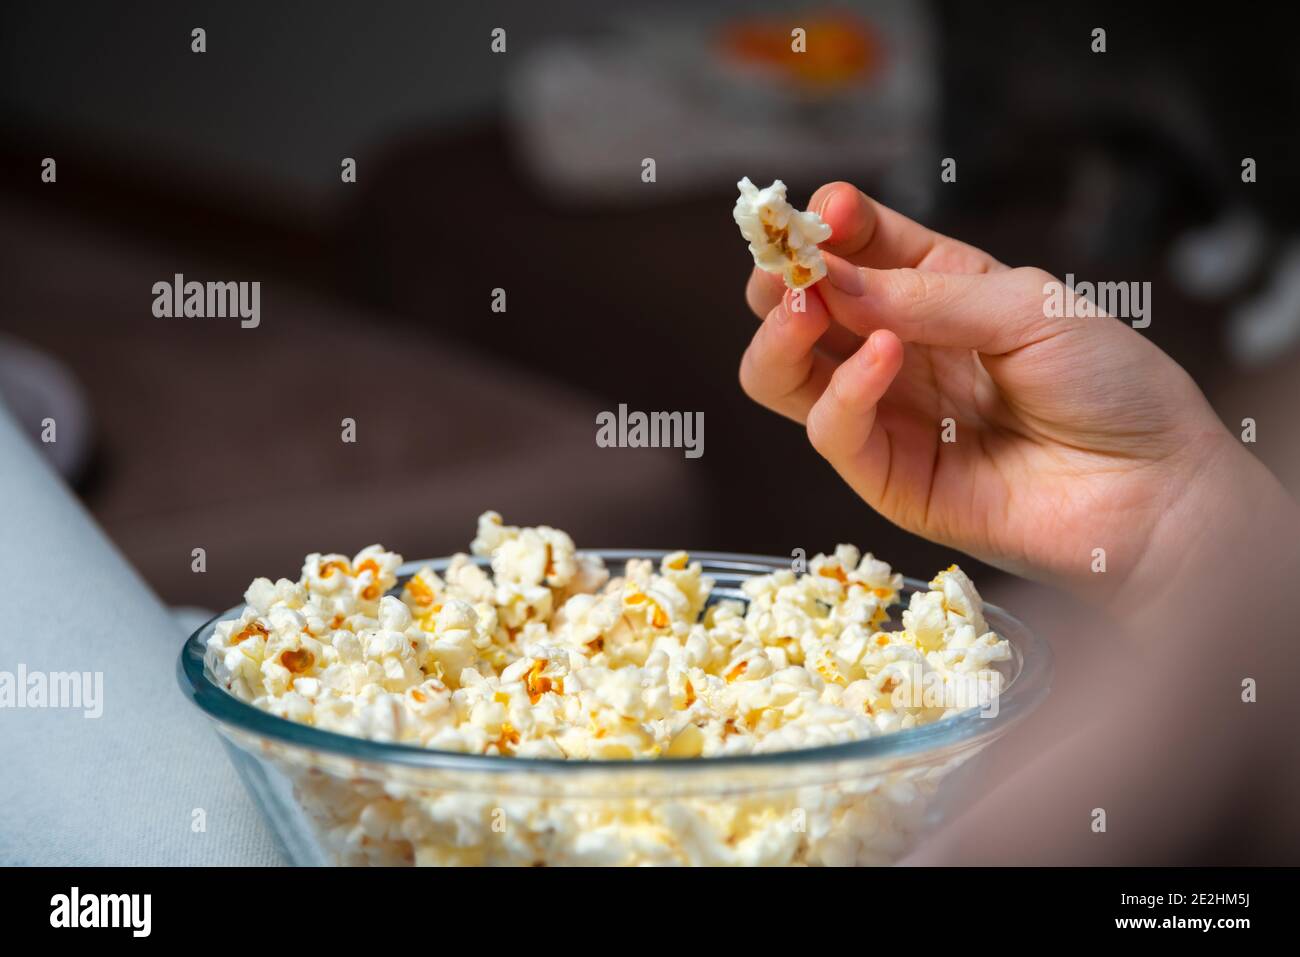 Close up of hand waking popcorn from a bowl while watching TV. Person sitting in comfortable couch and watching home cinema in the dark. Stock Photo